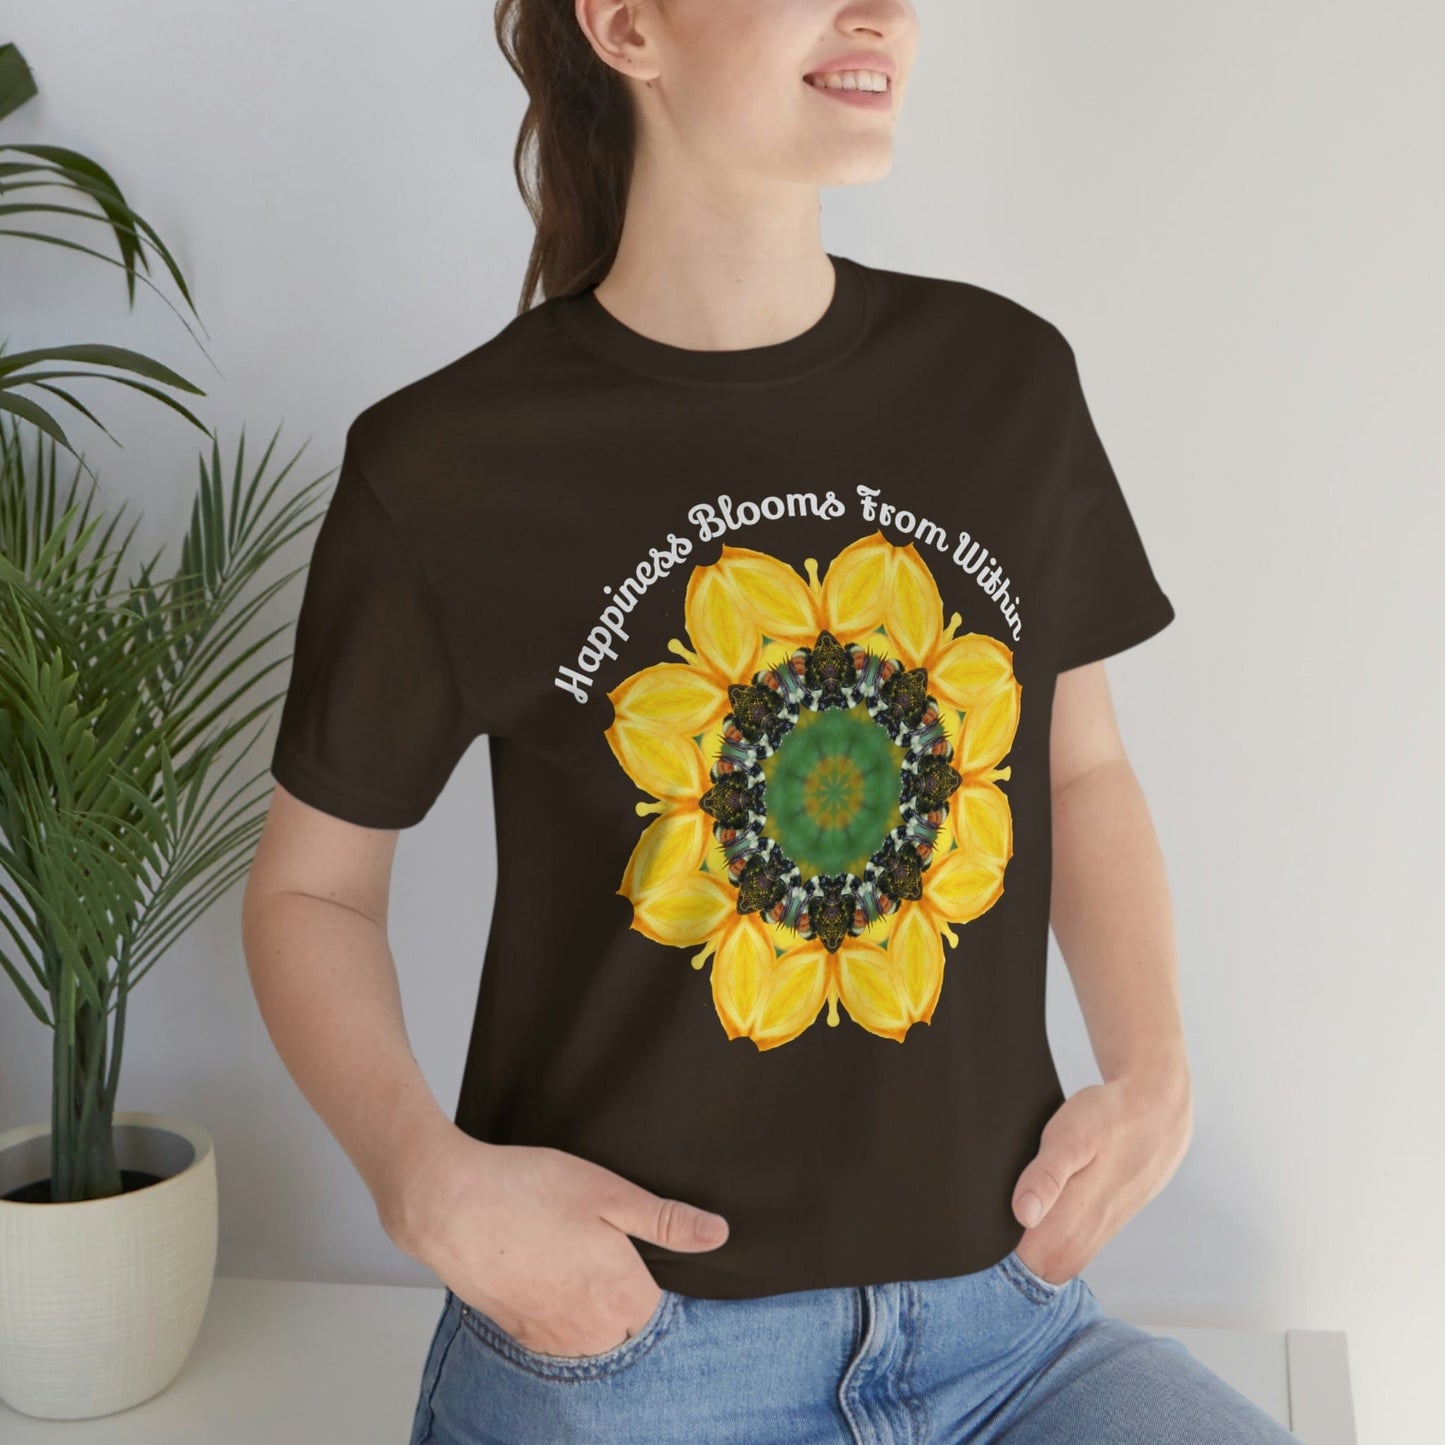 Bee T Shirt, Poet Shirt, Zen Mystical Insect Shirt, Witty Bug Shirt, Cute Shirts -Happiness Blooms From Within